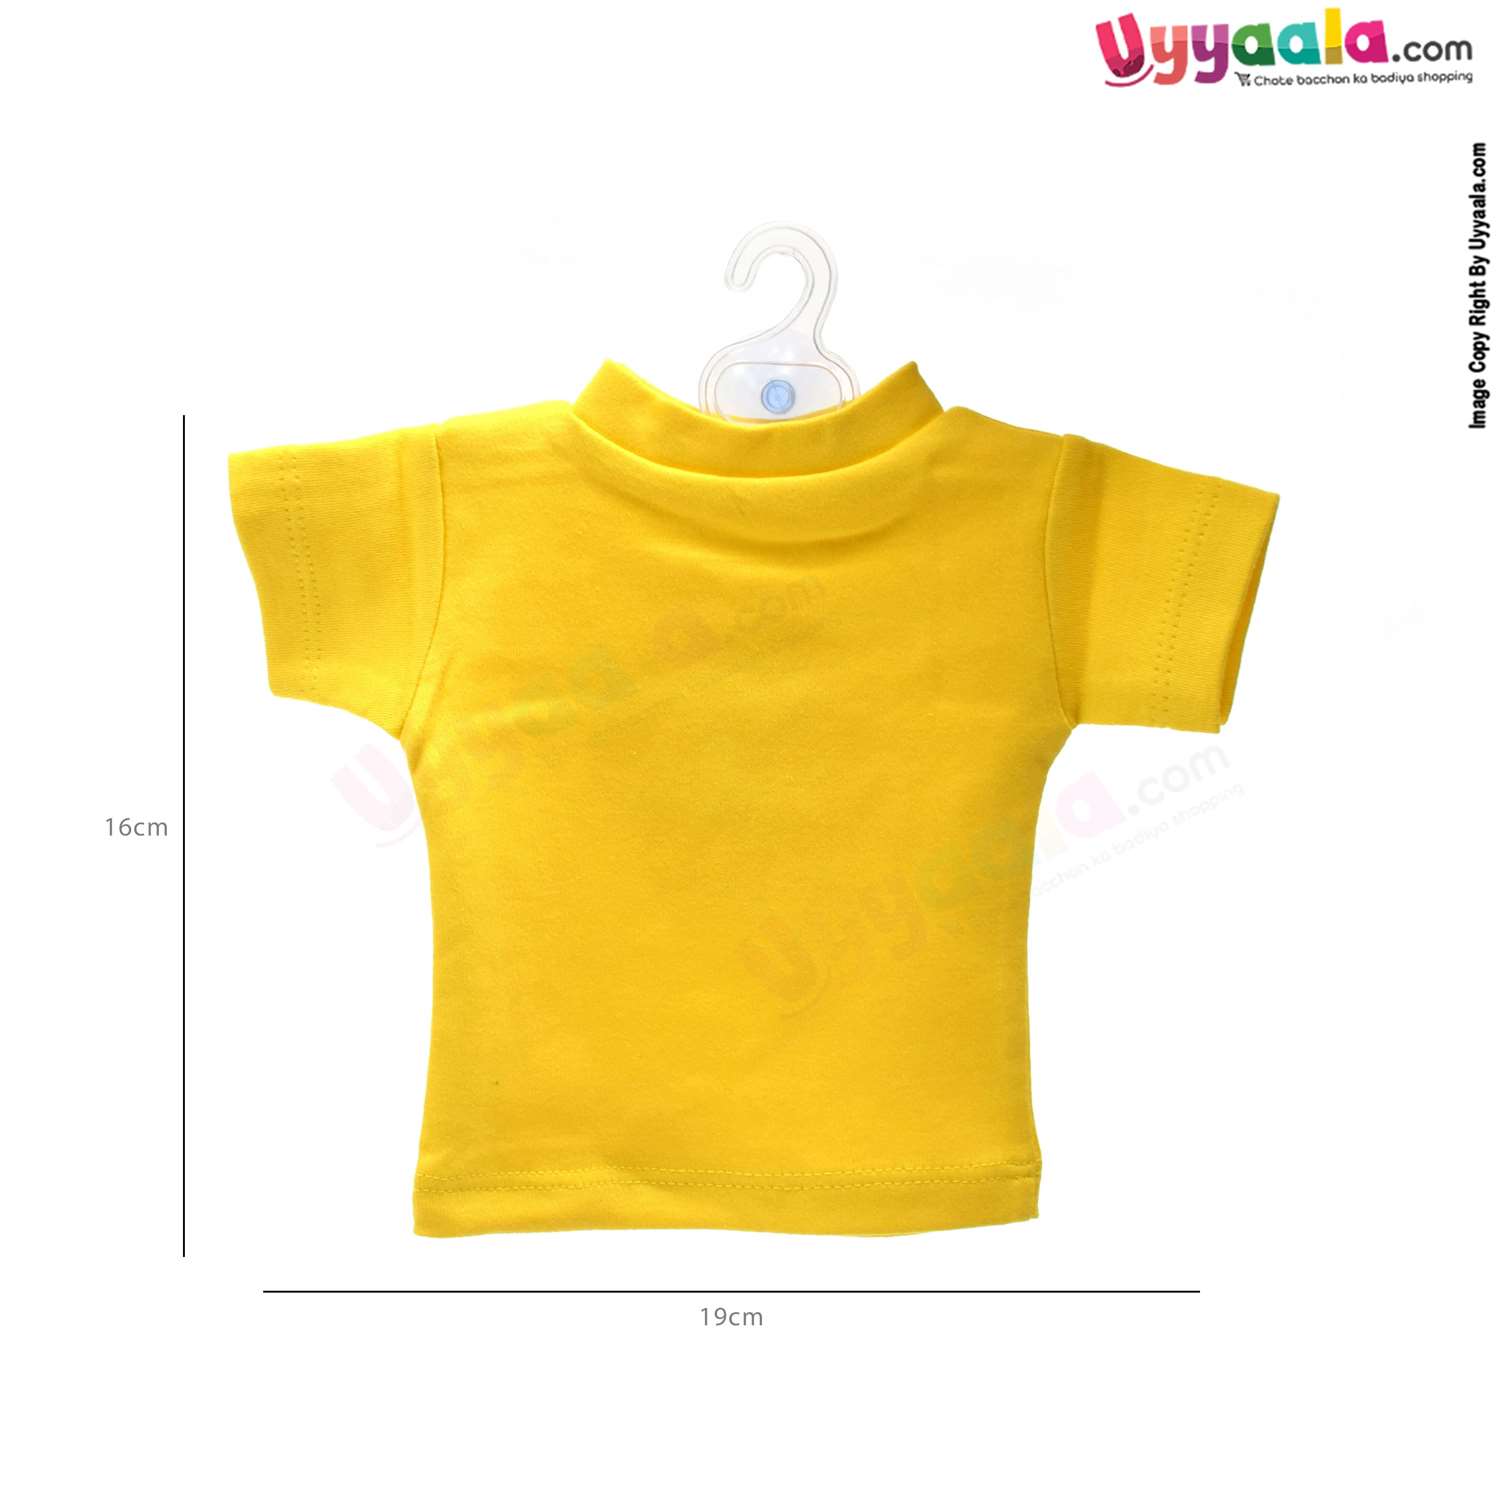 Baby on Board sign T-Shirt for Car , Size (19*16cm)- Yellow